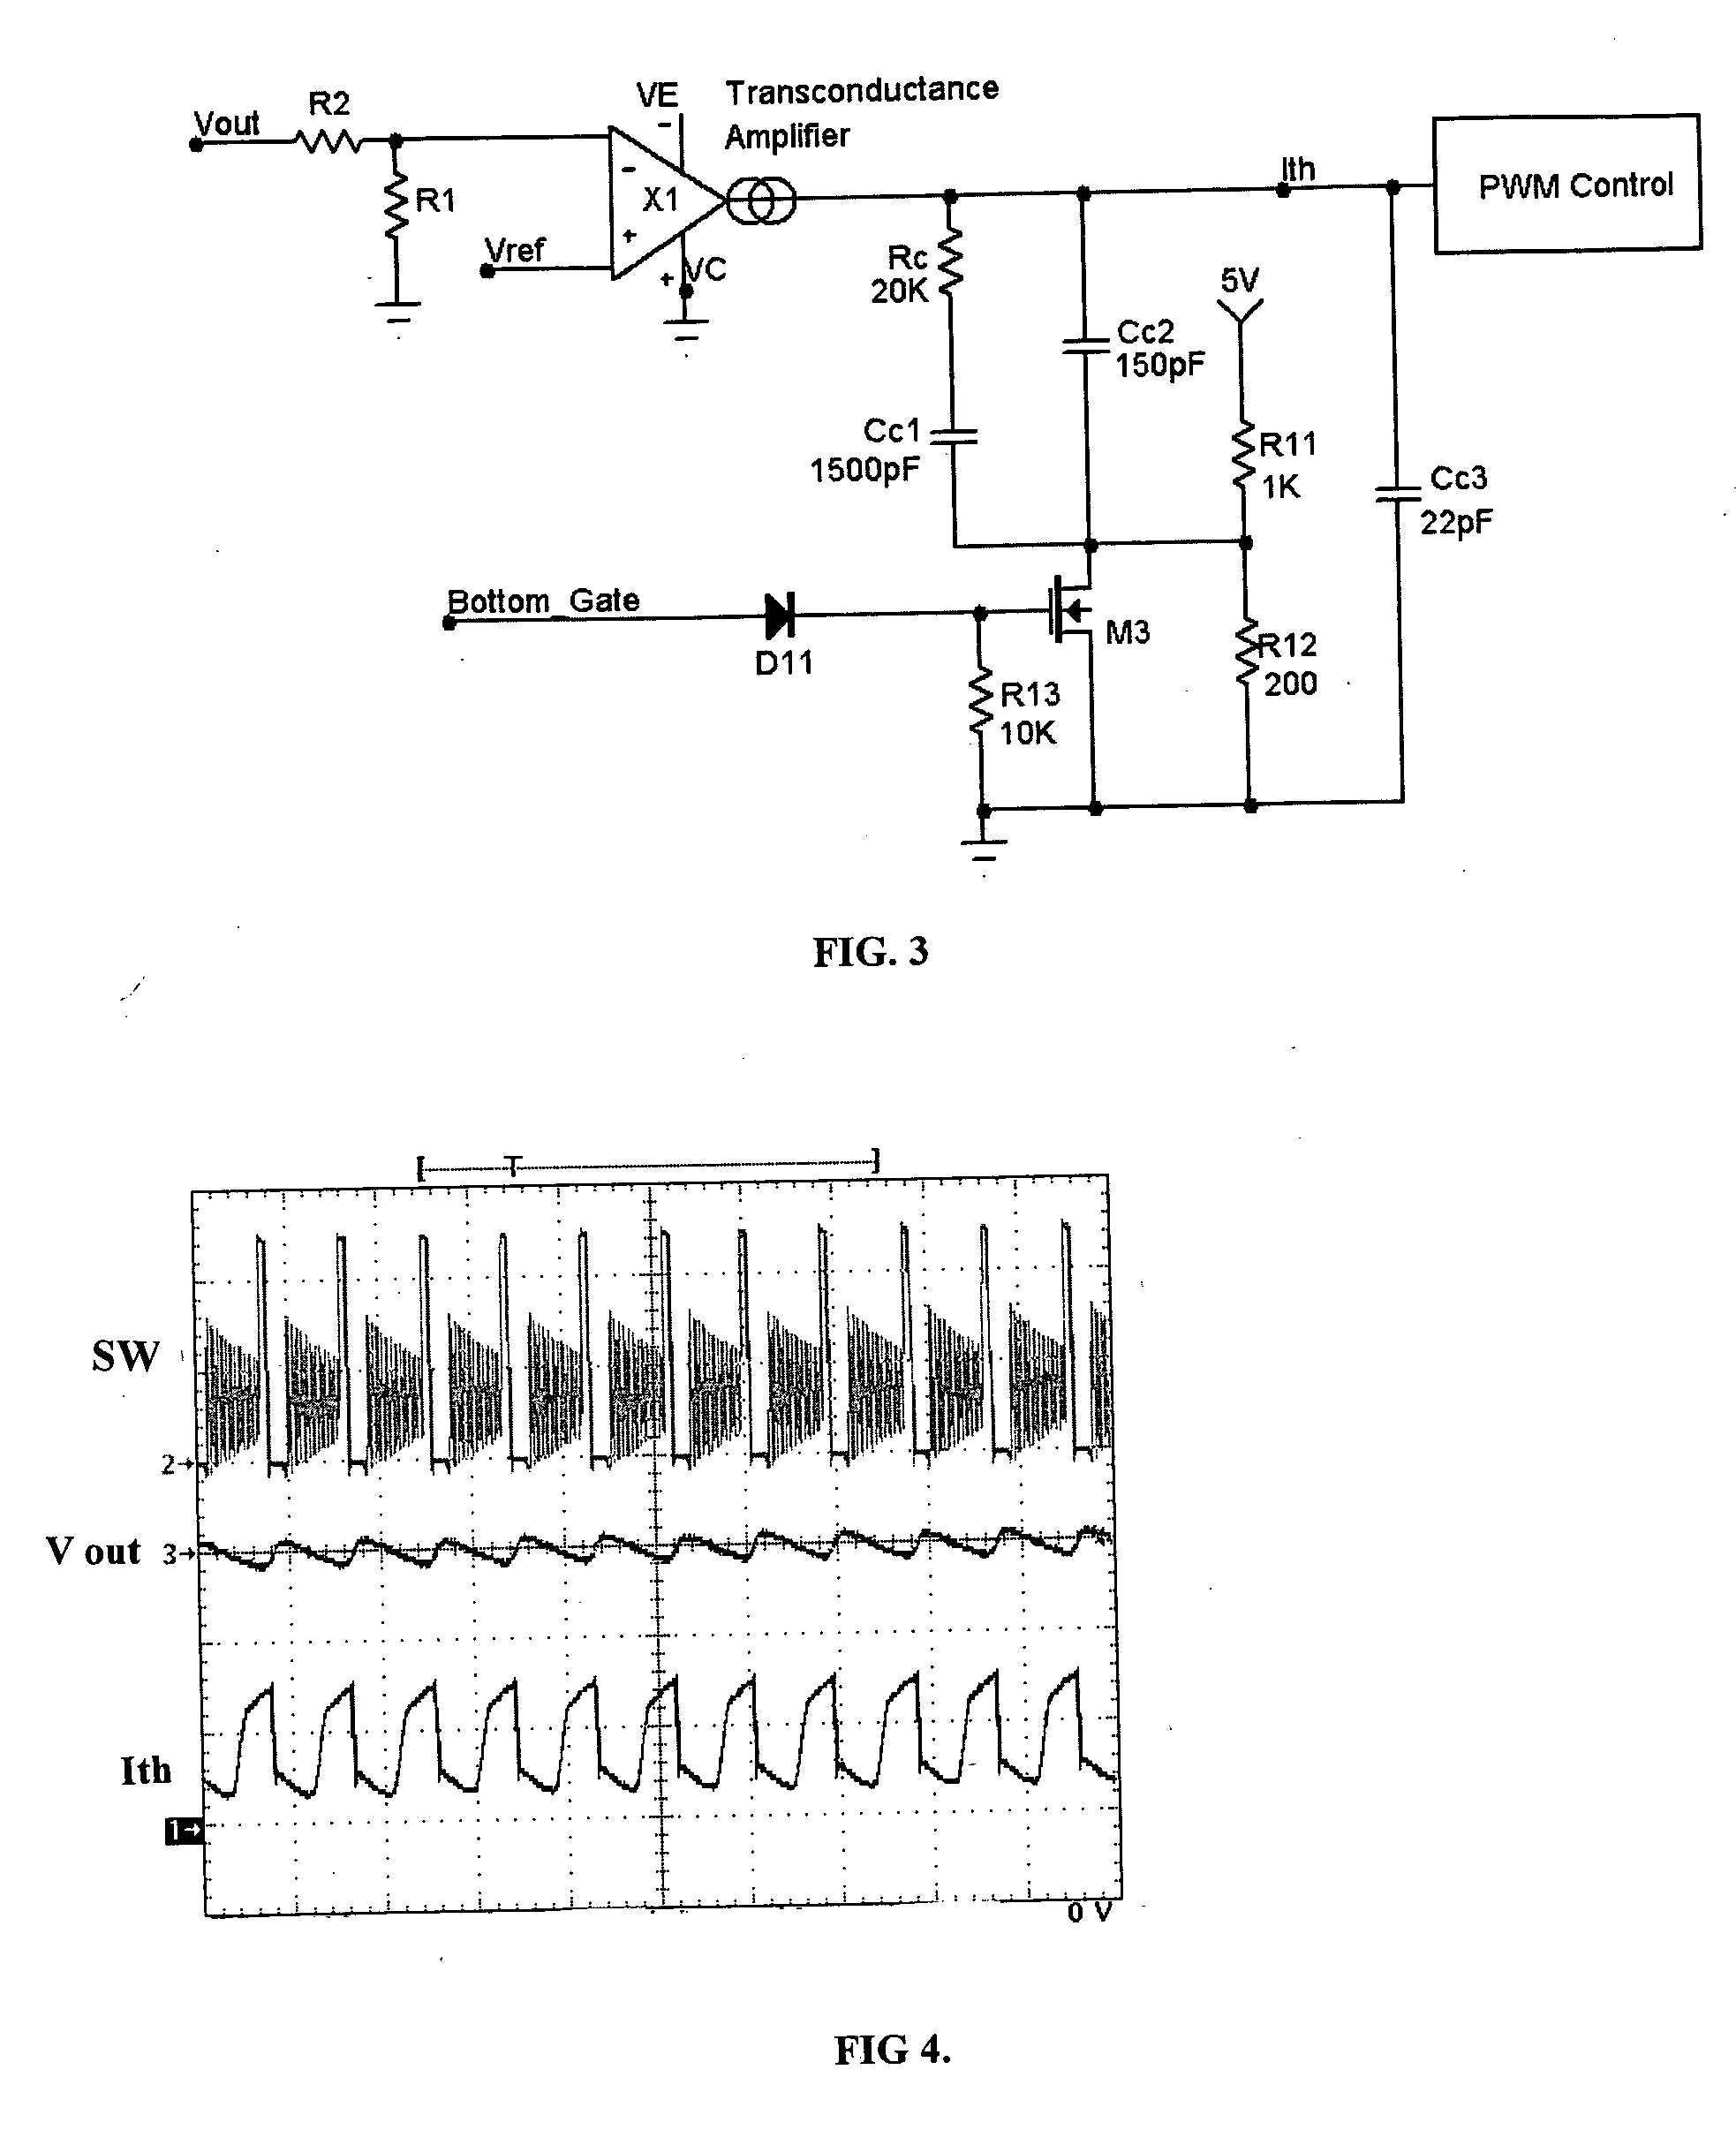 Output voltage ripple reduction technique for burst mode operation of power converter